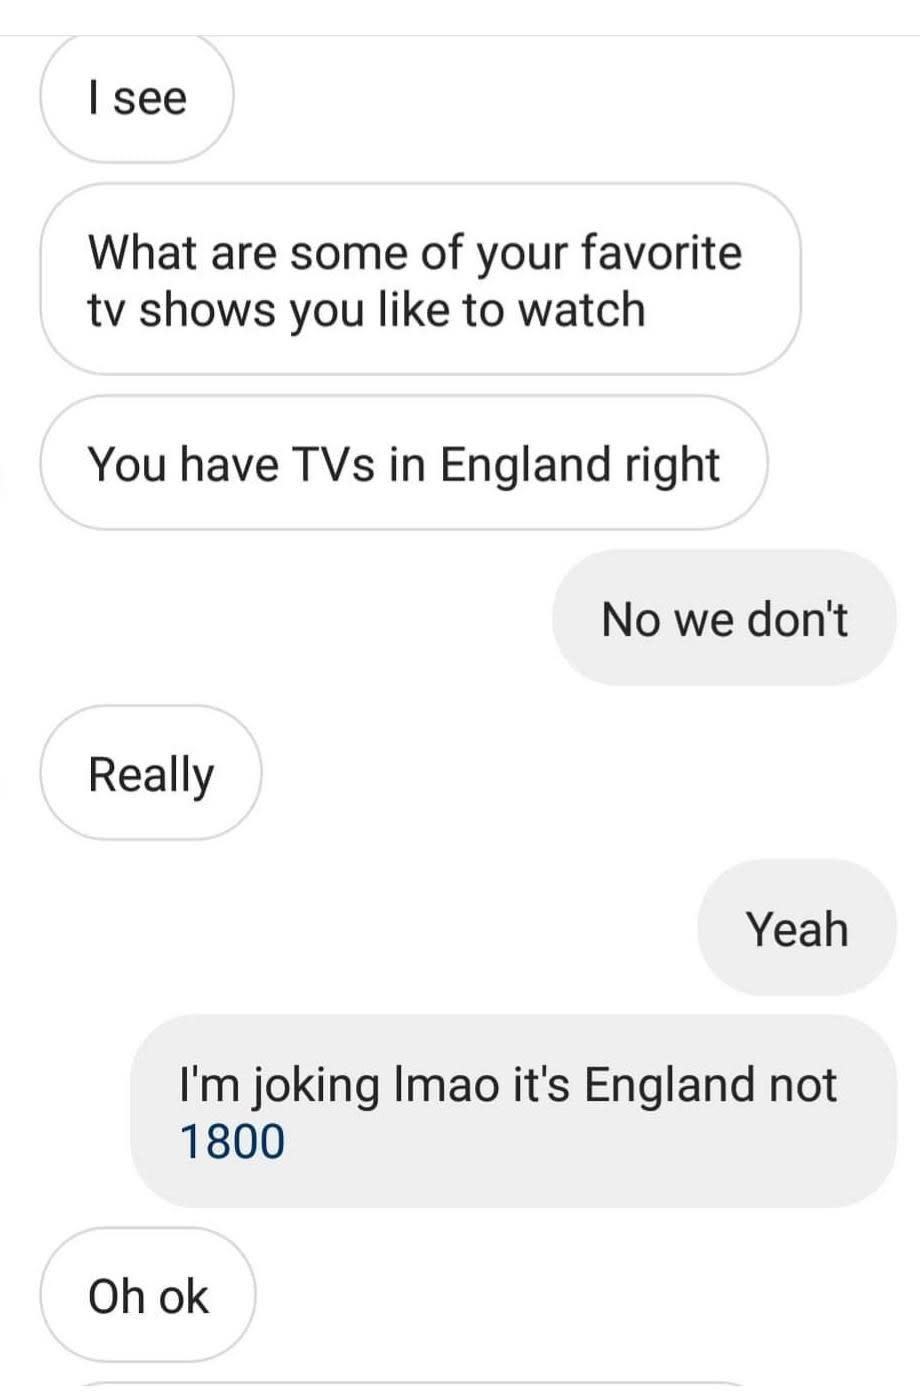 Discussion between two people where one asks if they have TVs in England